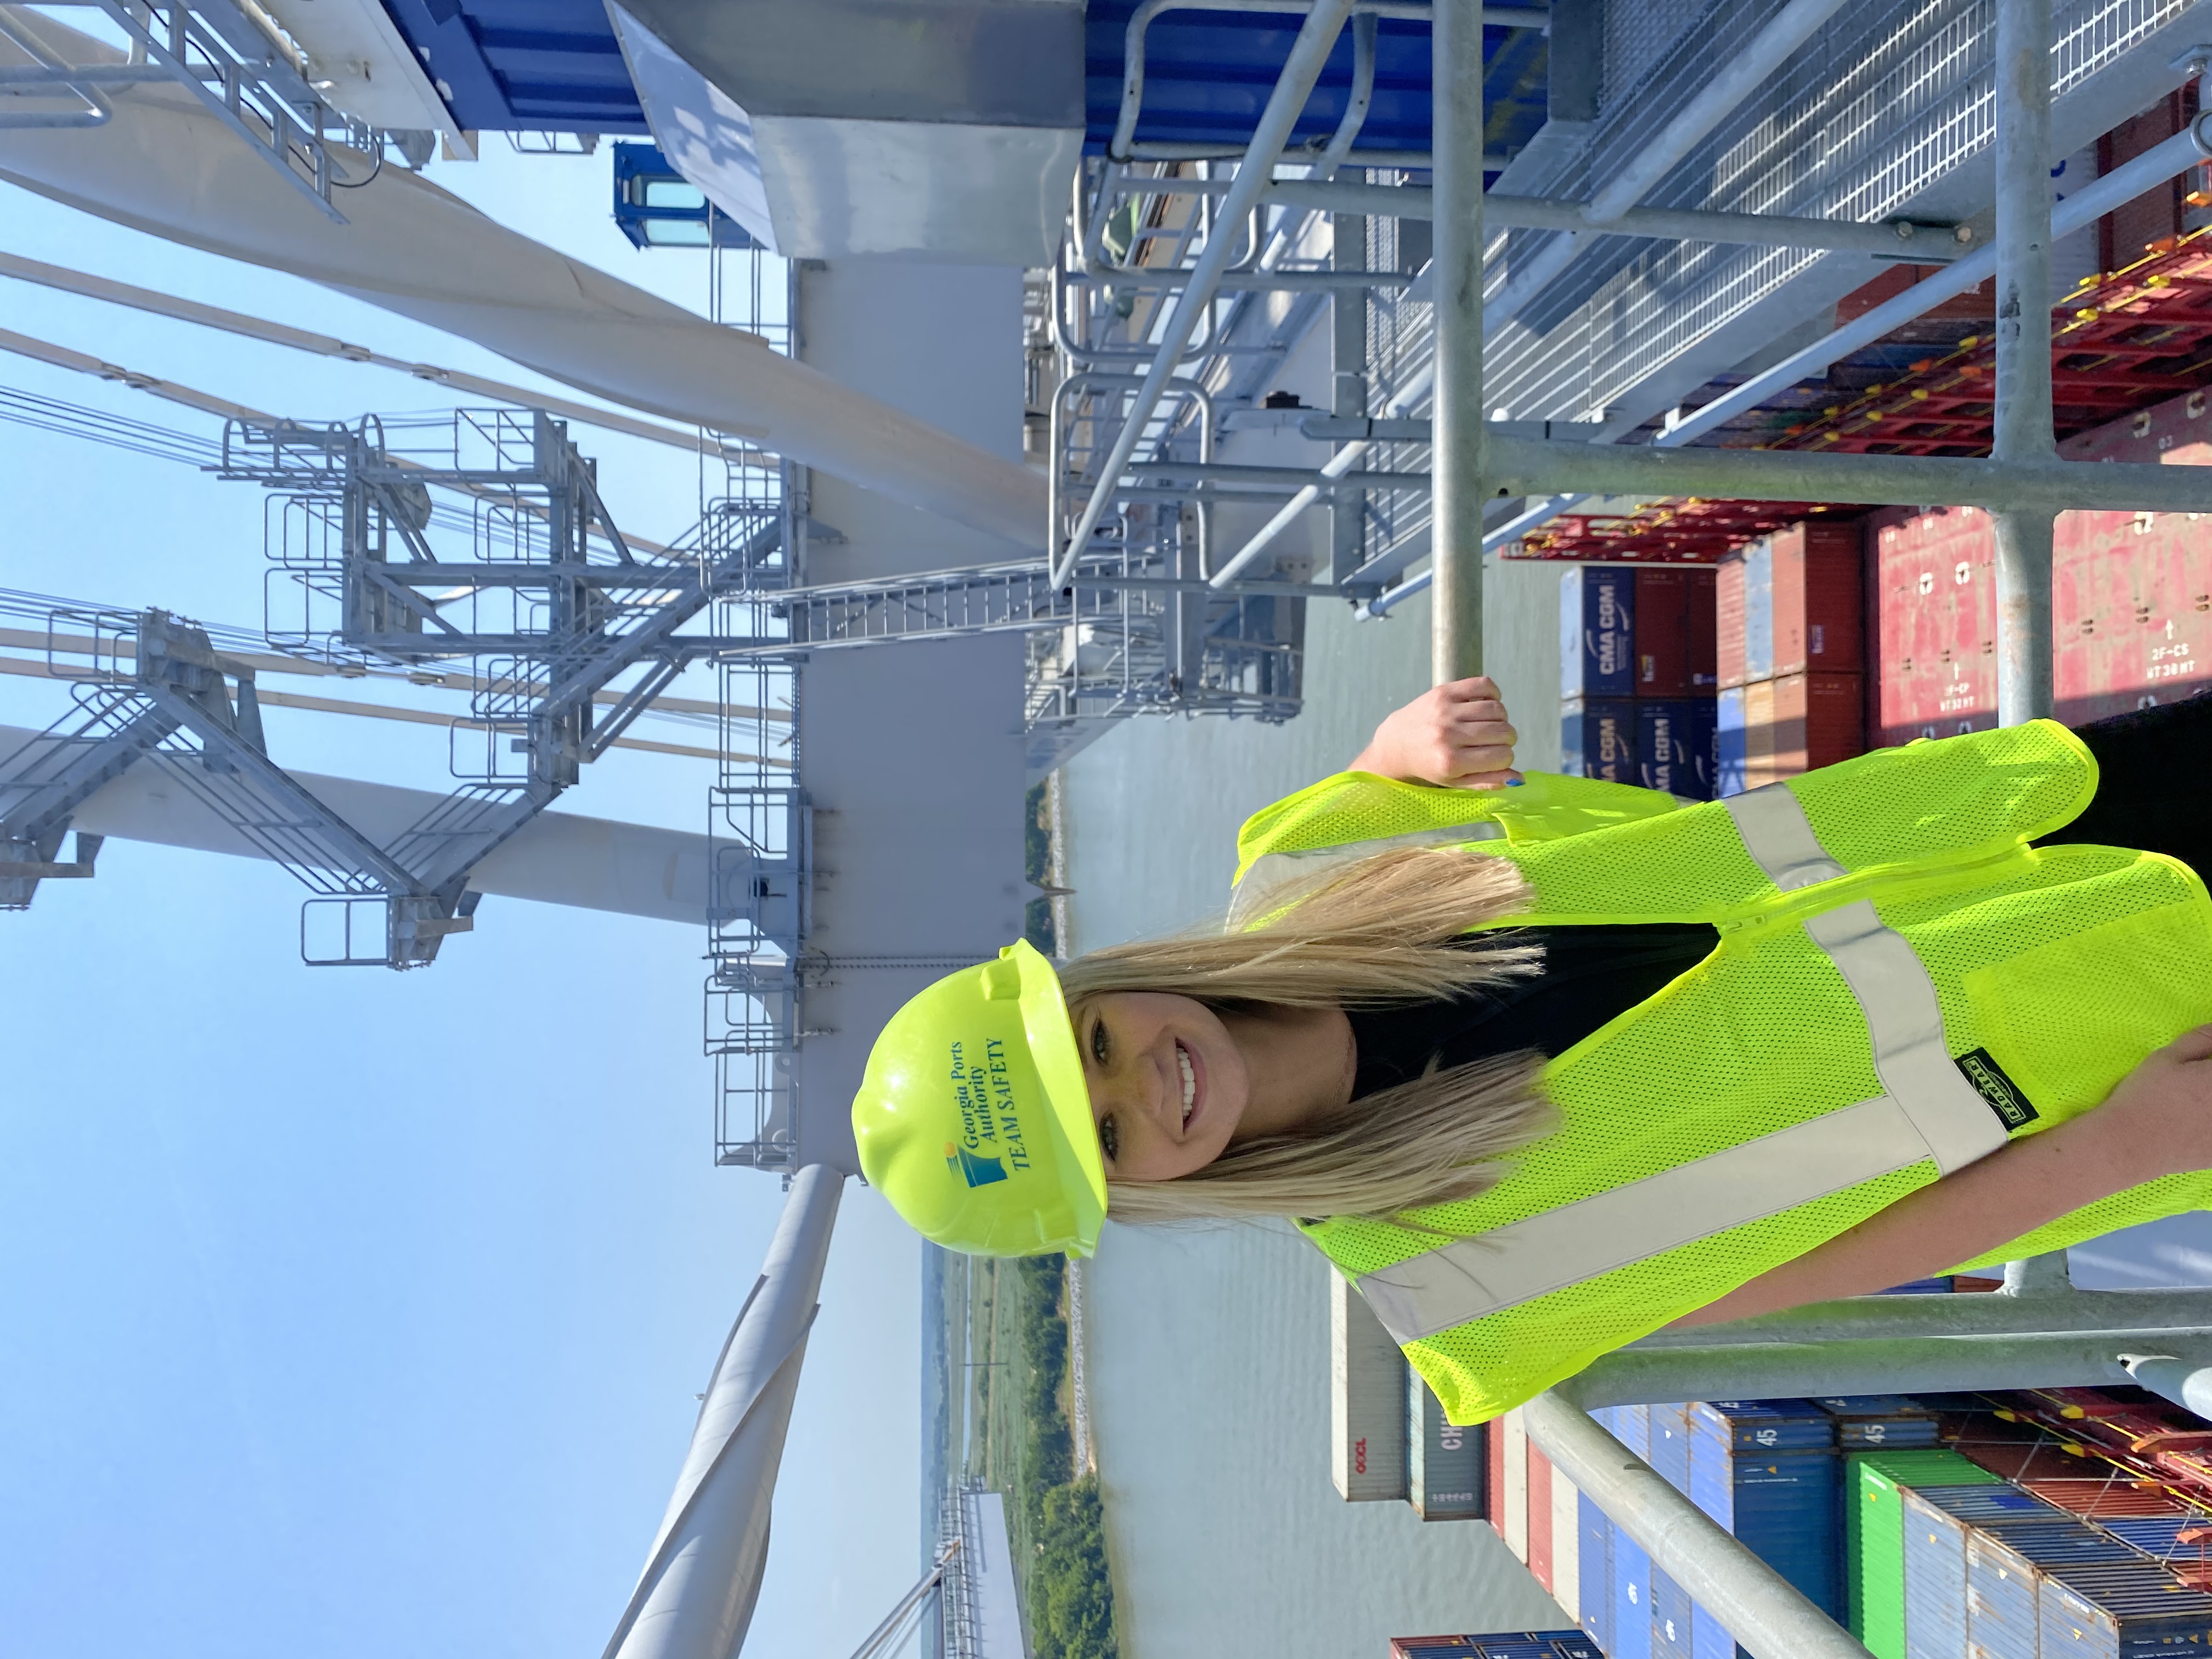 Camuso in a hard hat and yellow construction vest standing on the ship